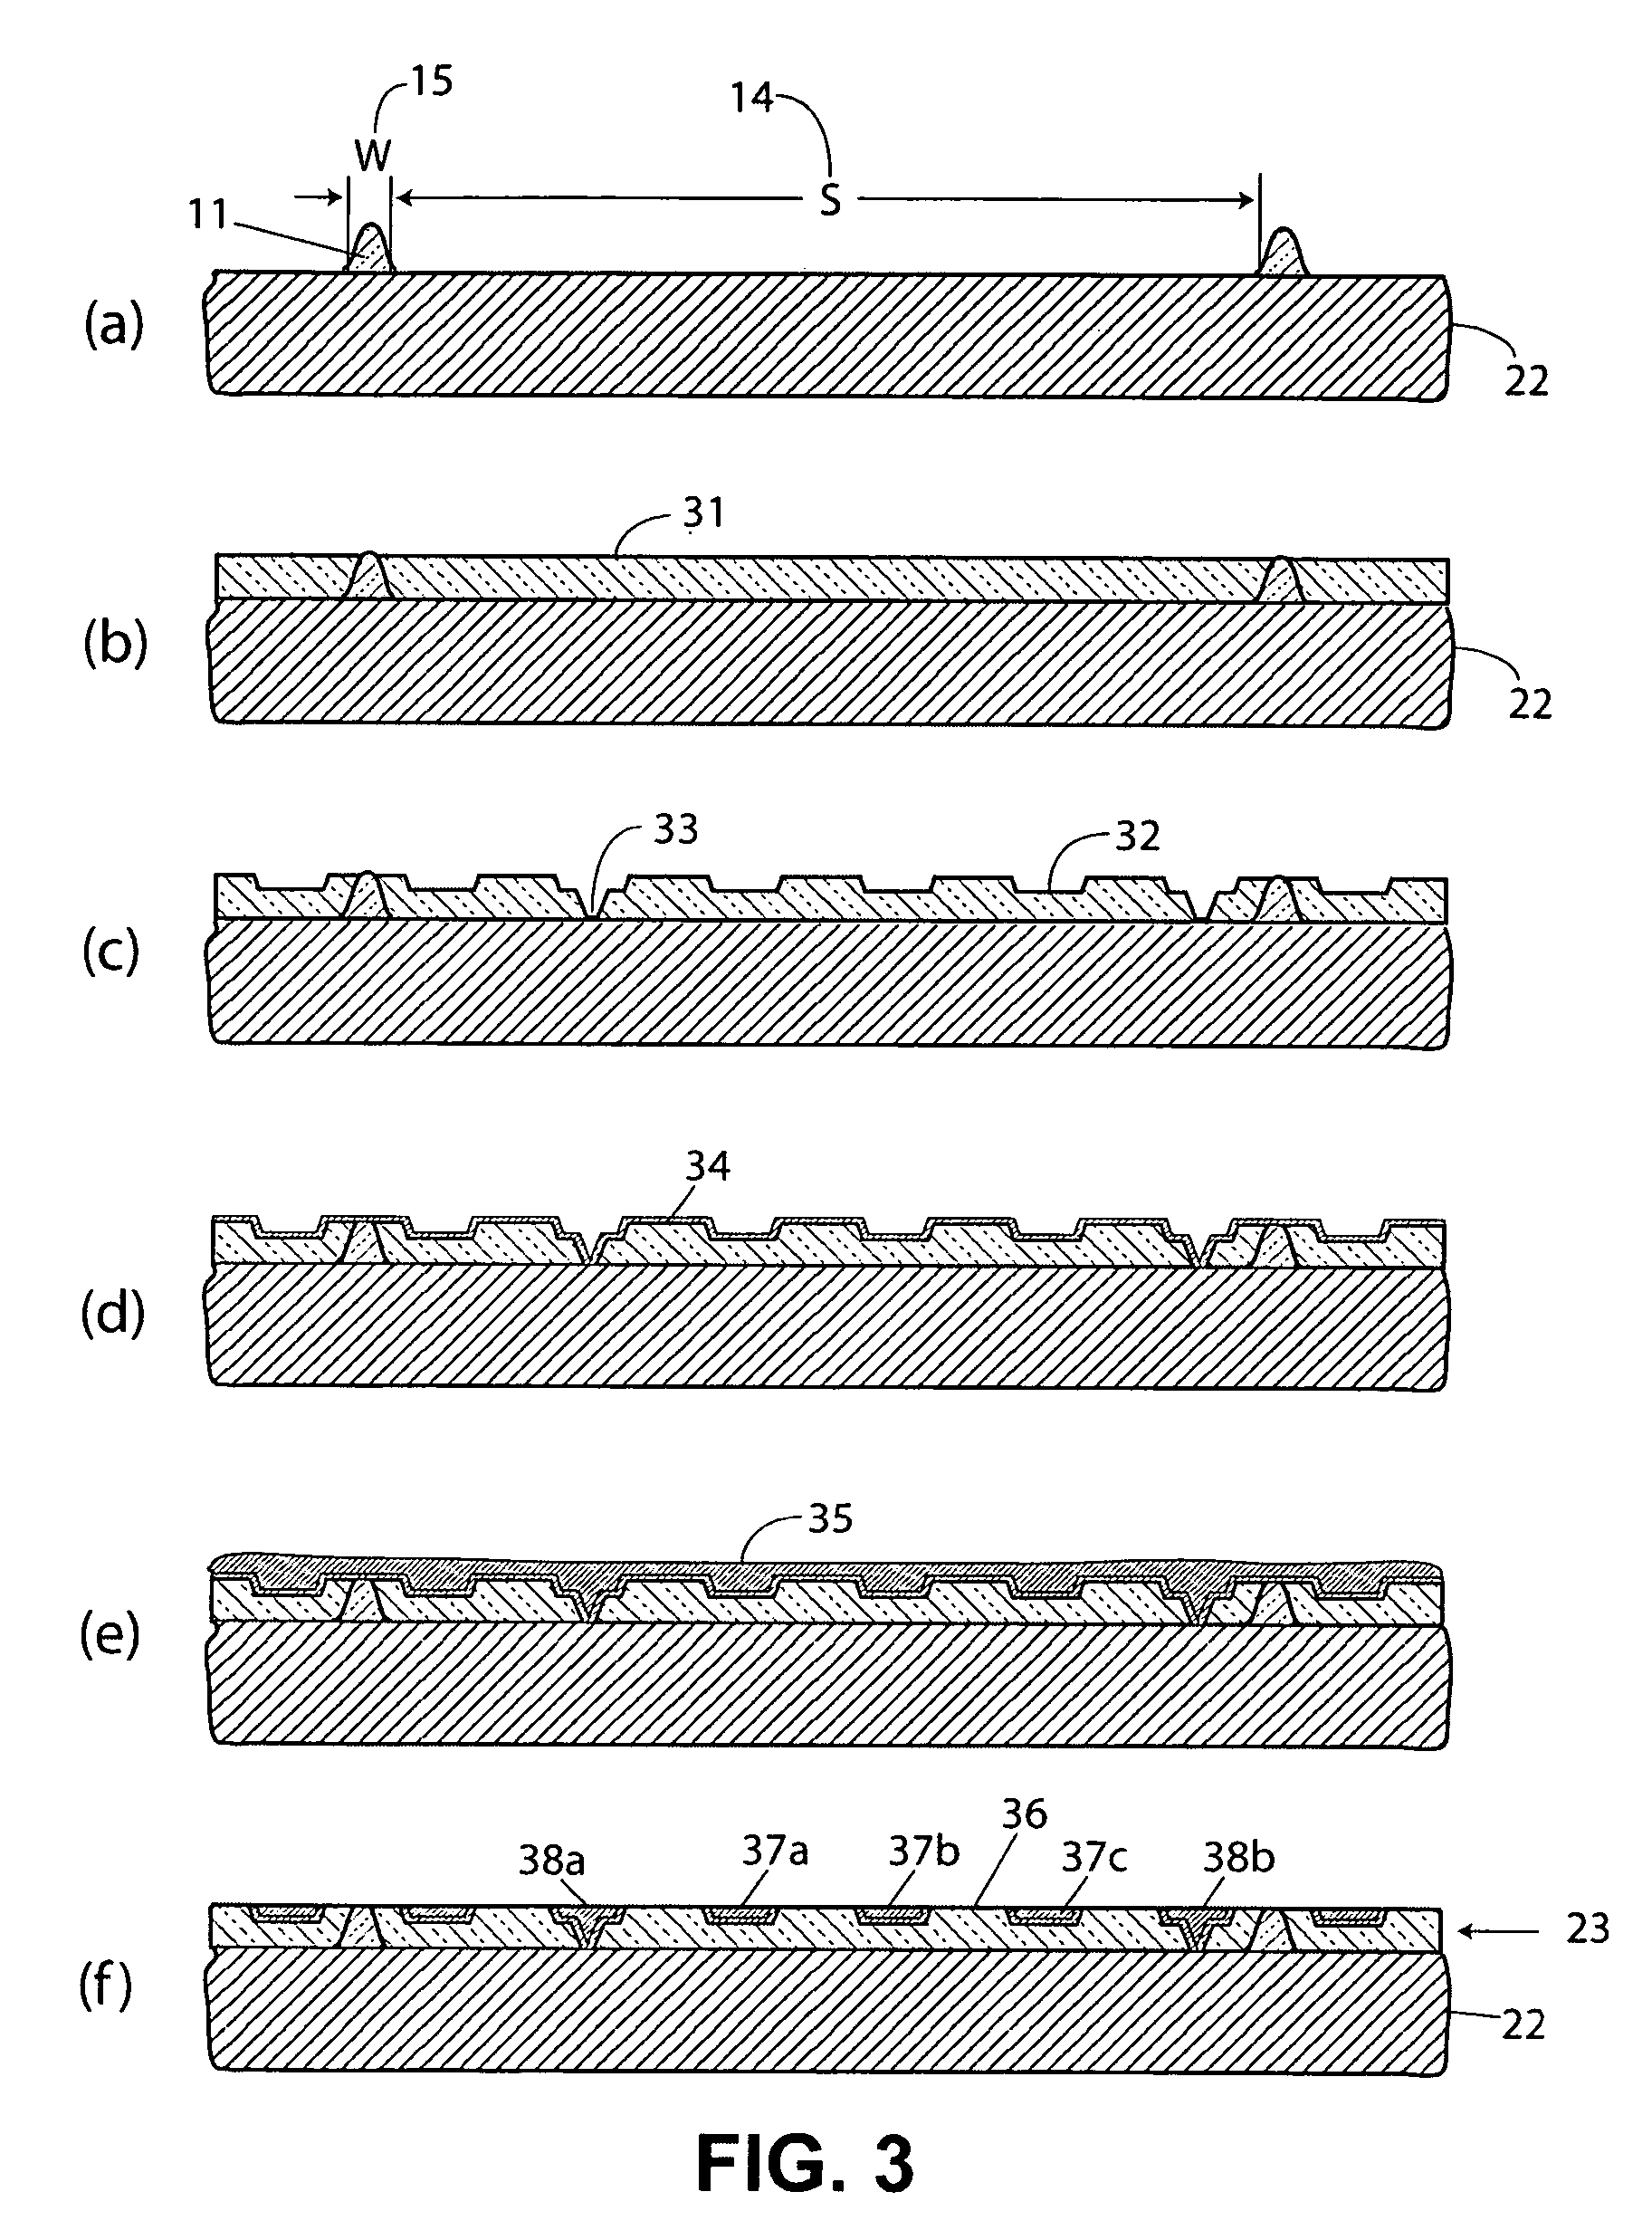 Tiled construction of layered materials